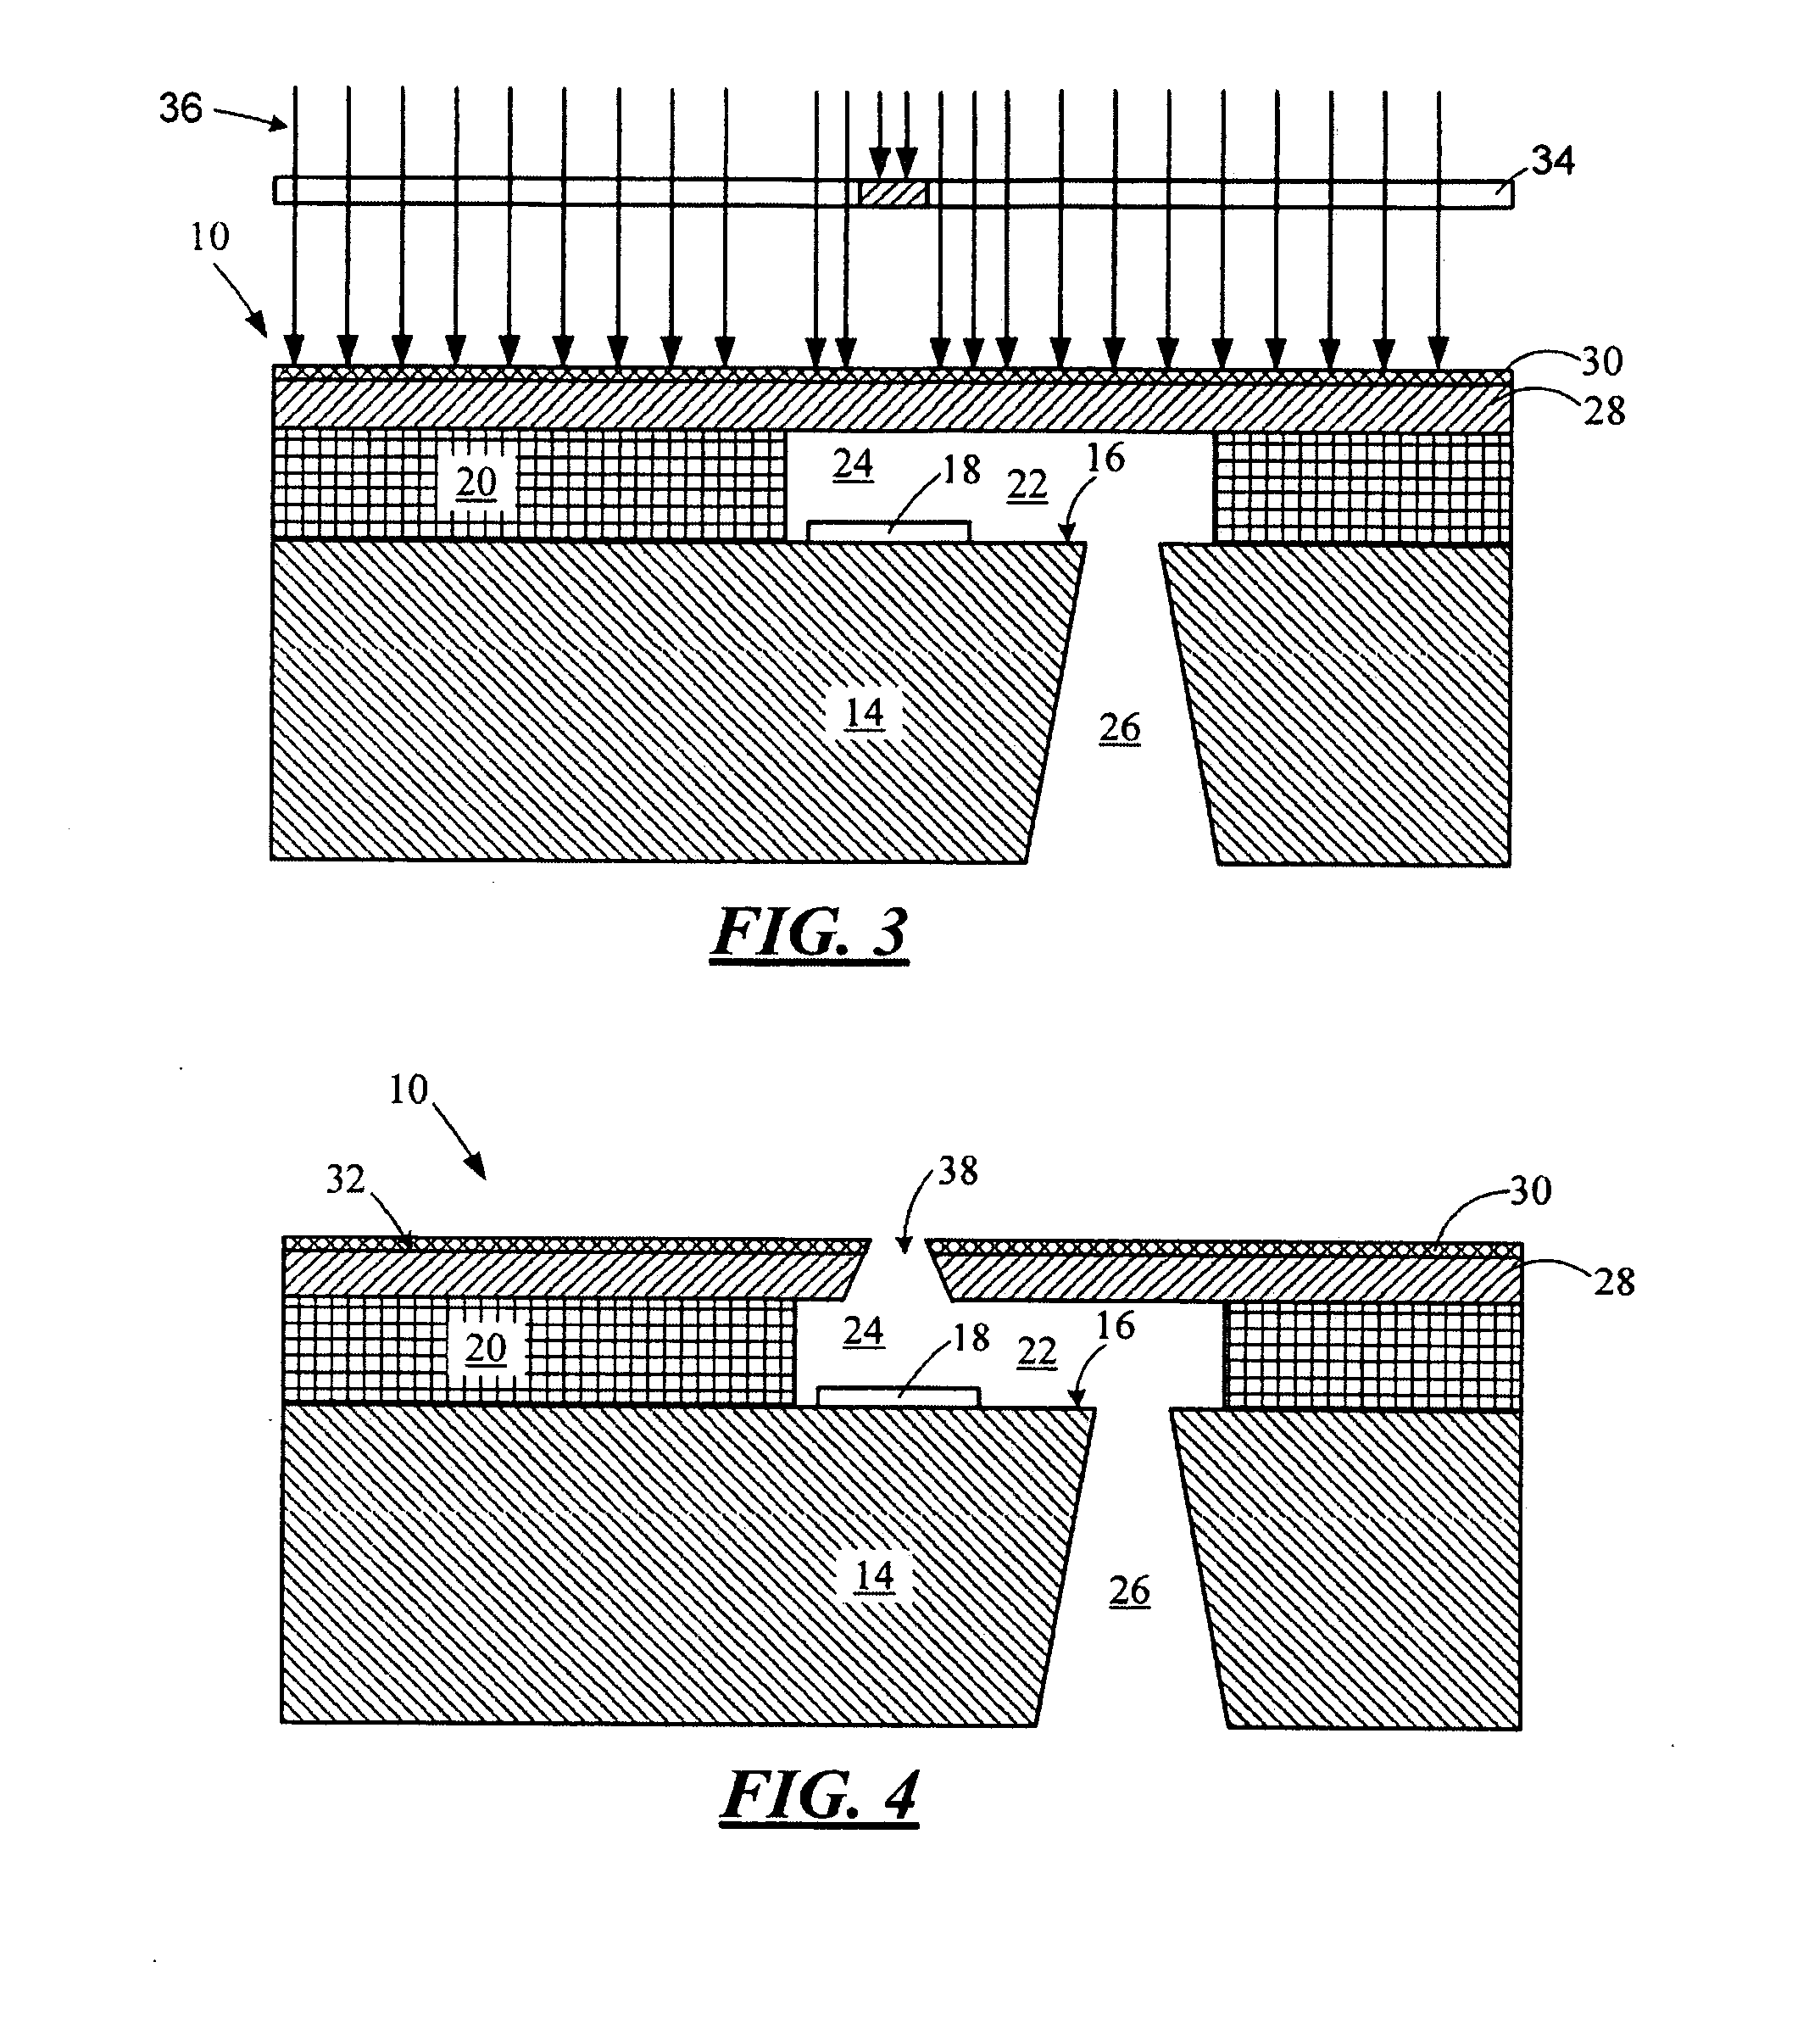 Hydrophobic nozzle plate structures for micro-fluid ejection heads